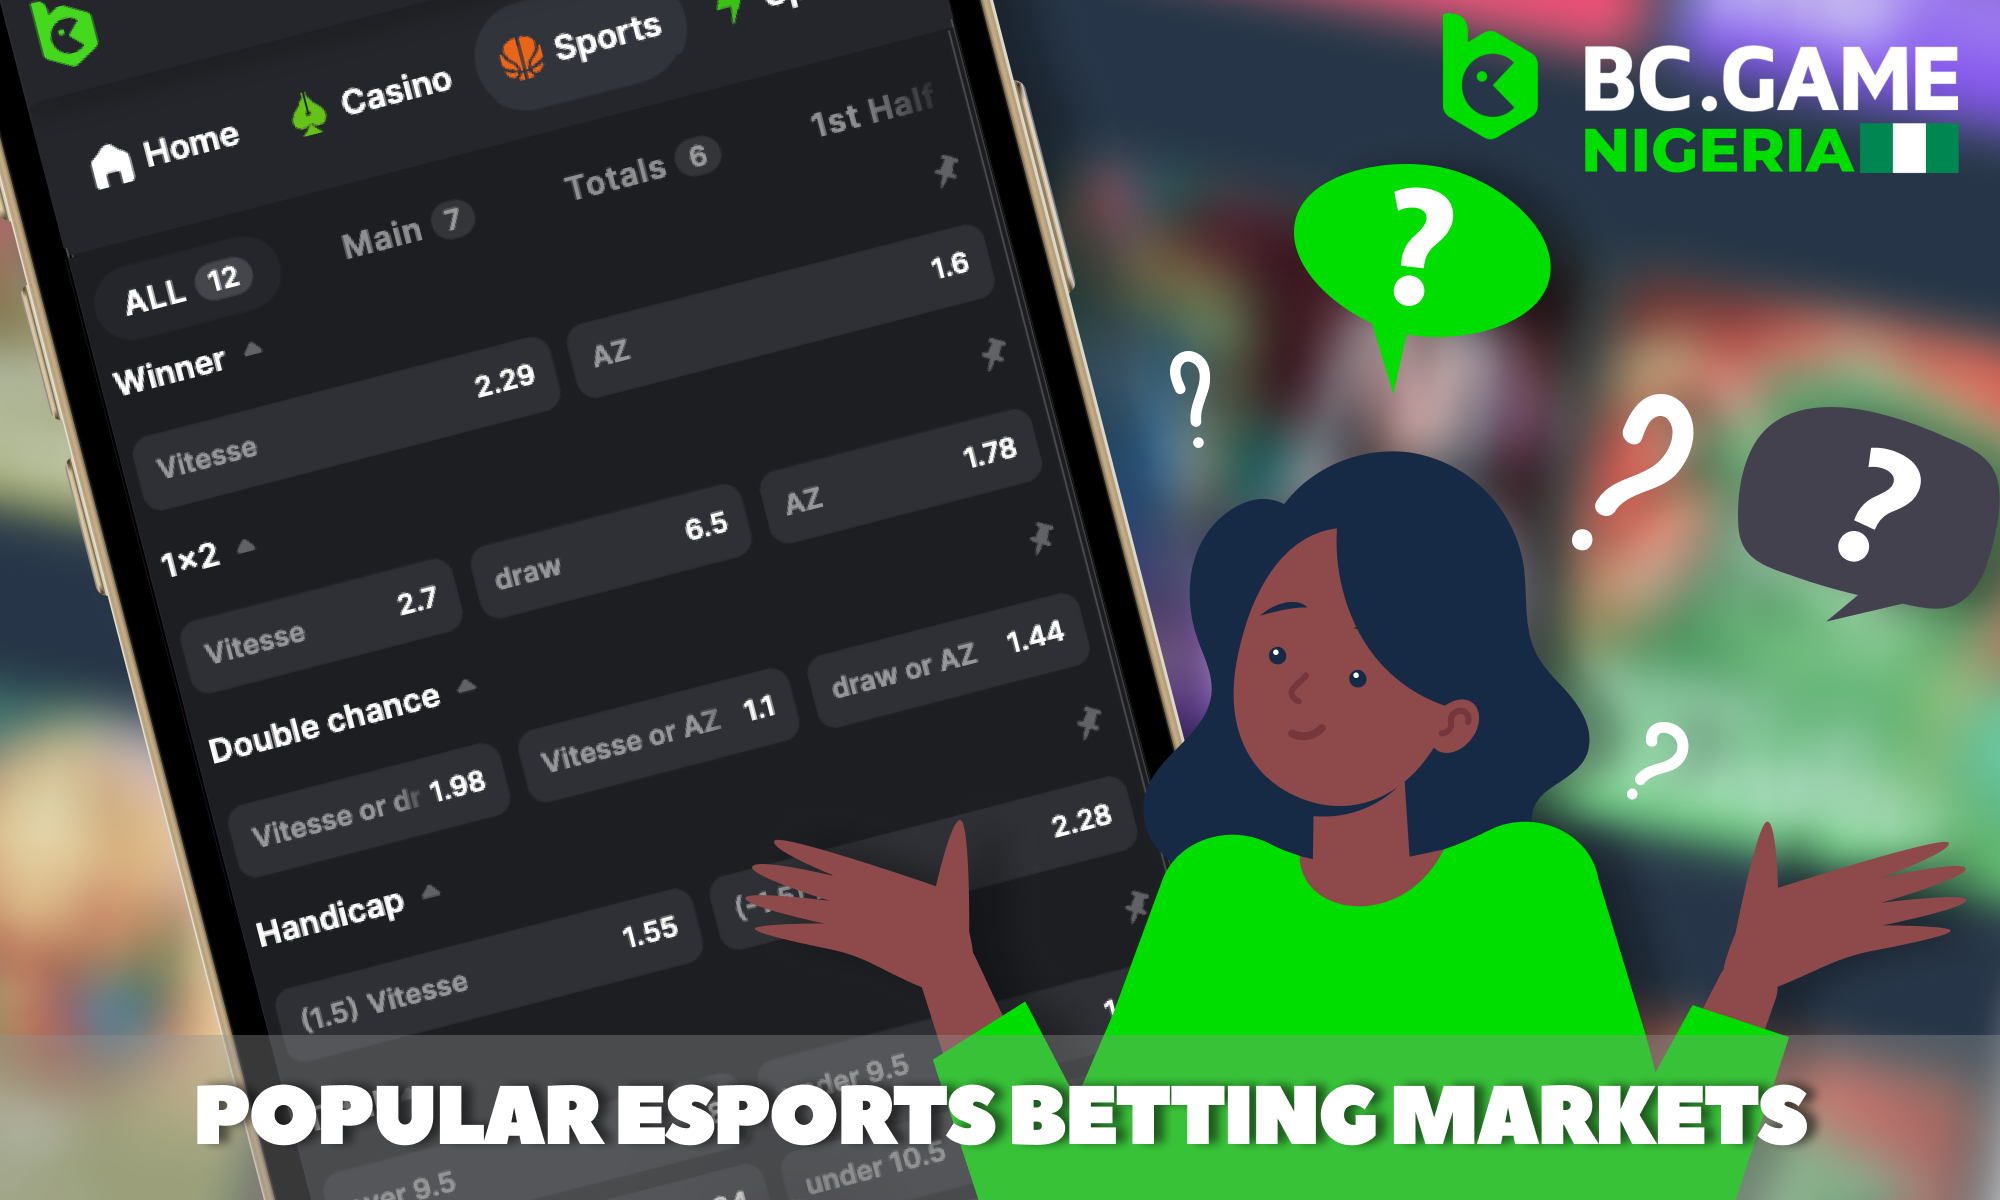 Popular esports markets for bettors from Nigeria - BC Game